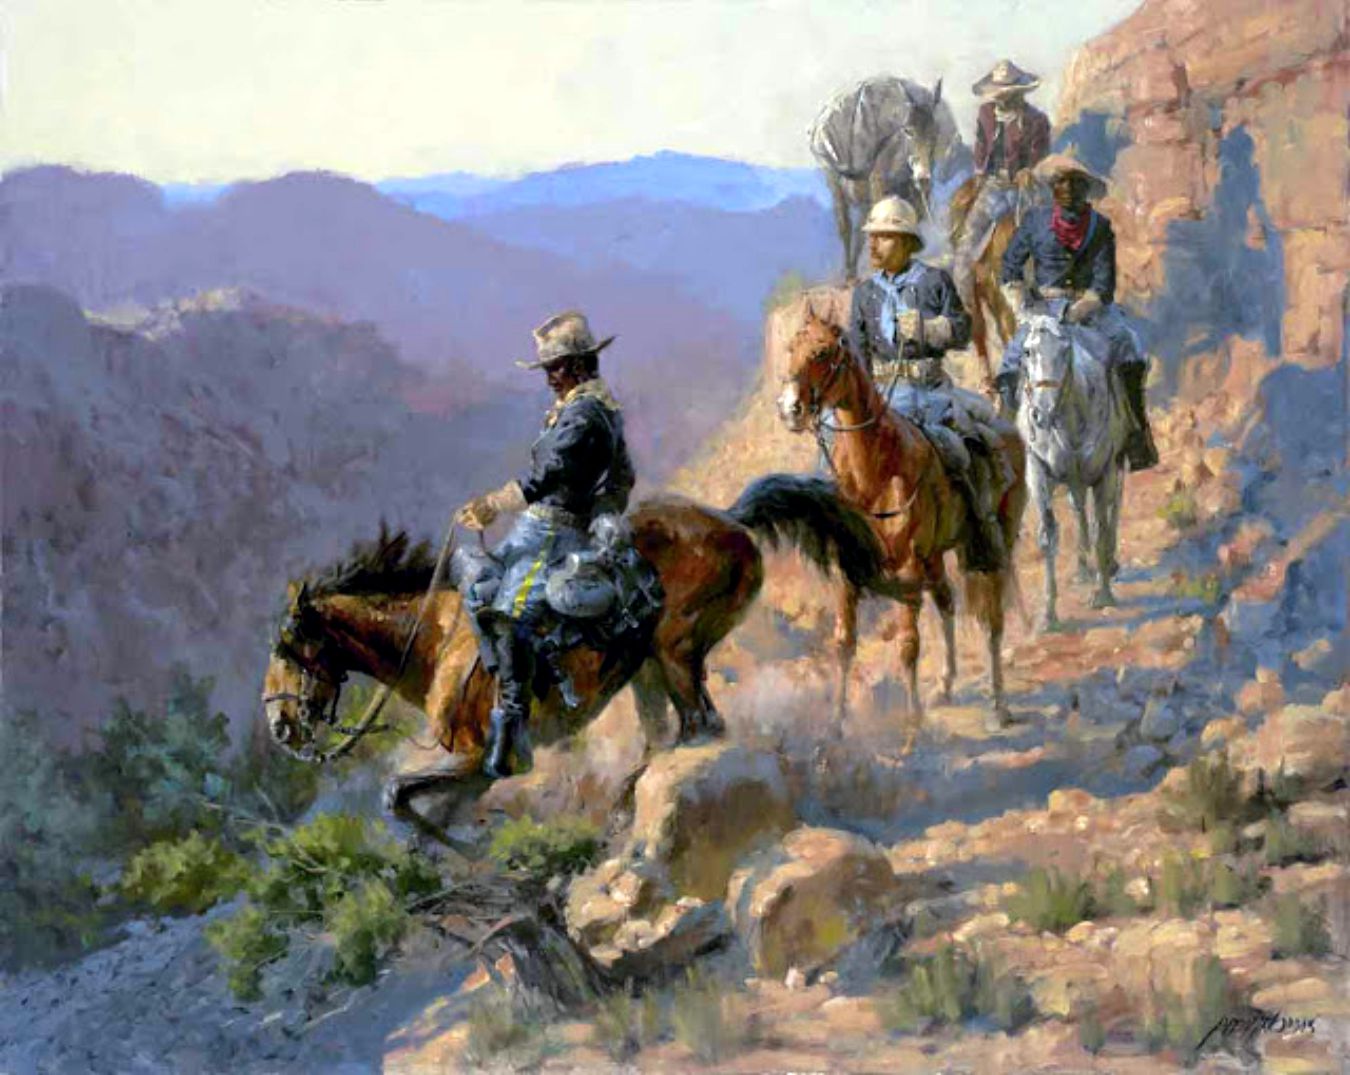 BUFFALO SOLDIERS - artist unknown to me